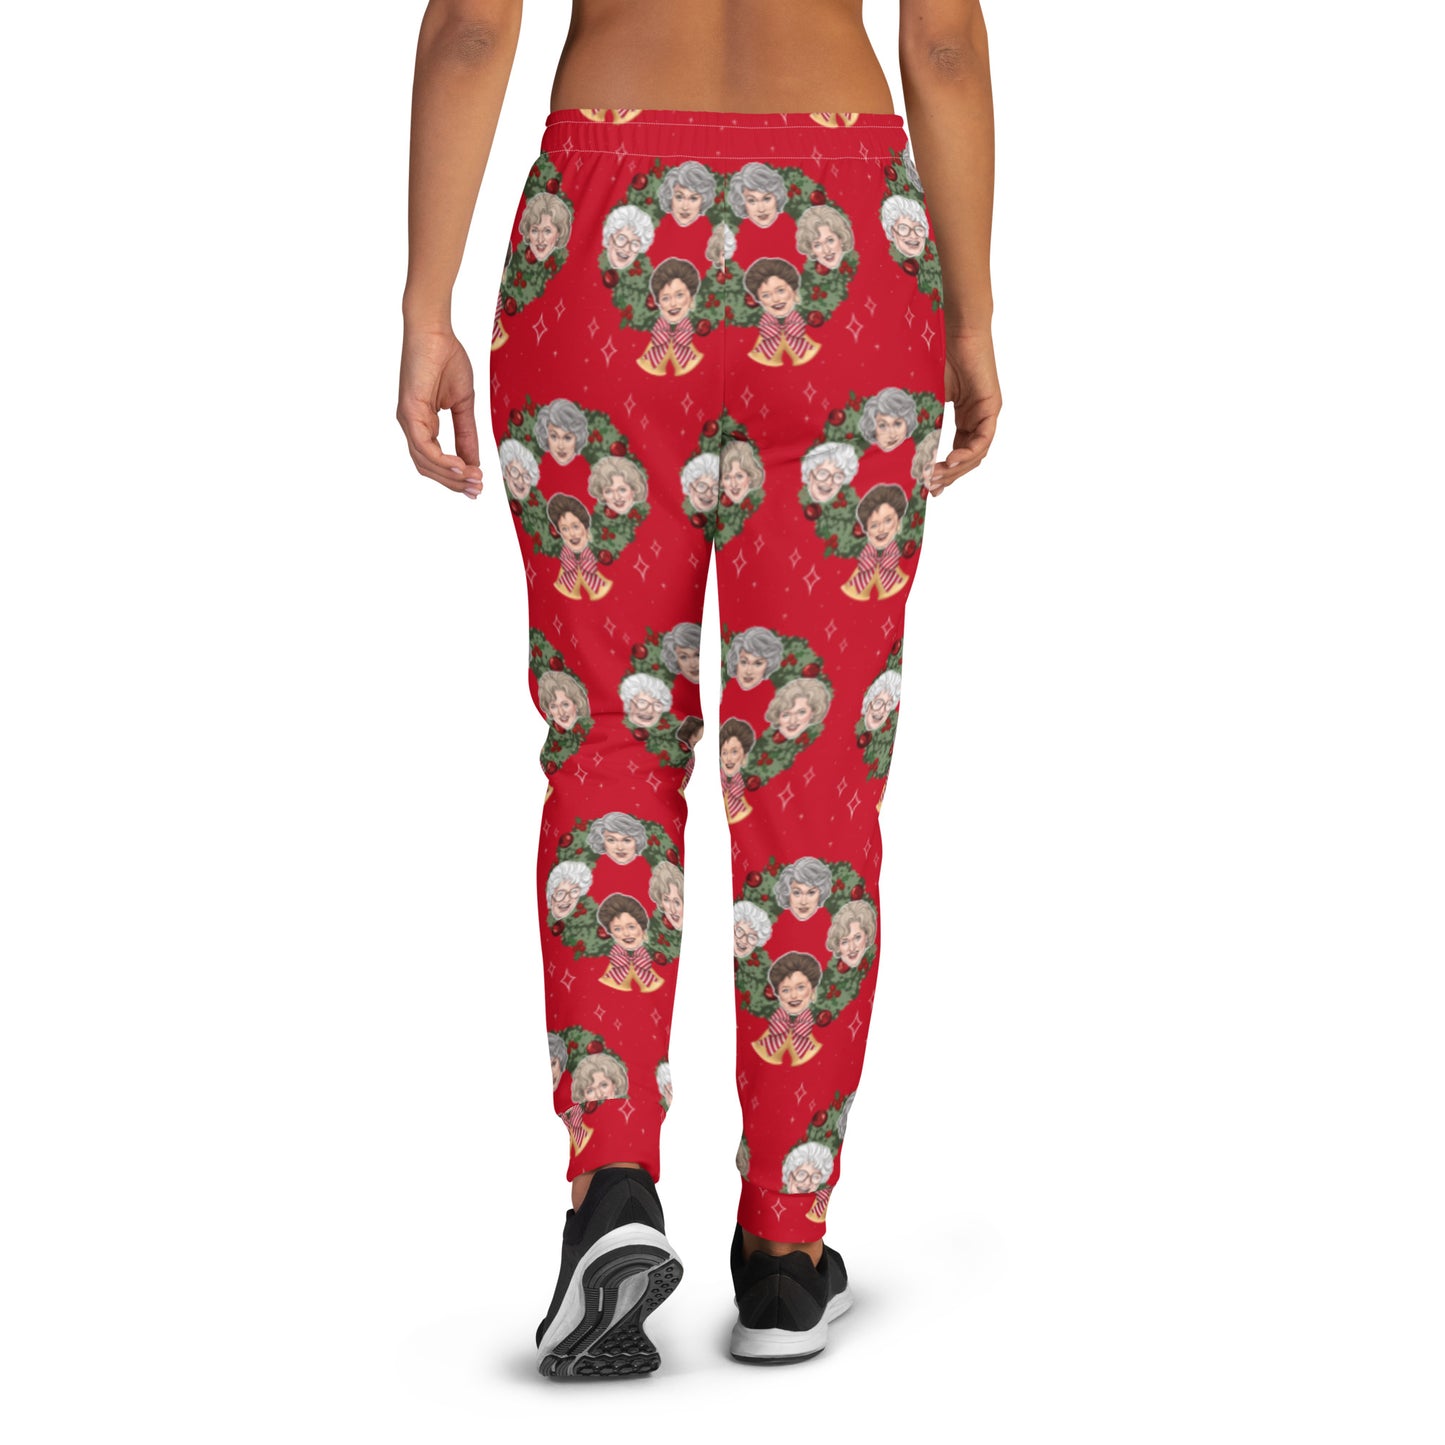 “The Merry in Miami” Women's Joggers